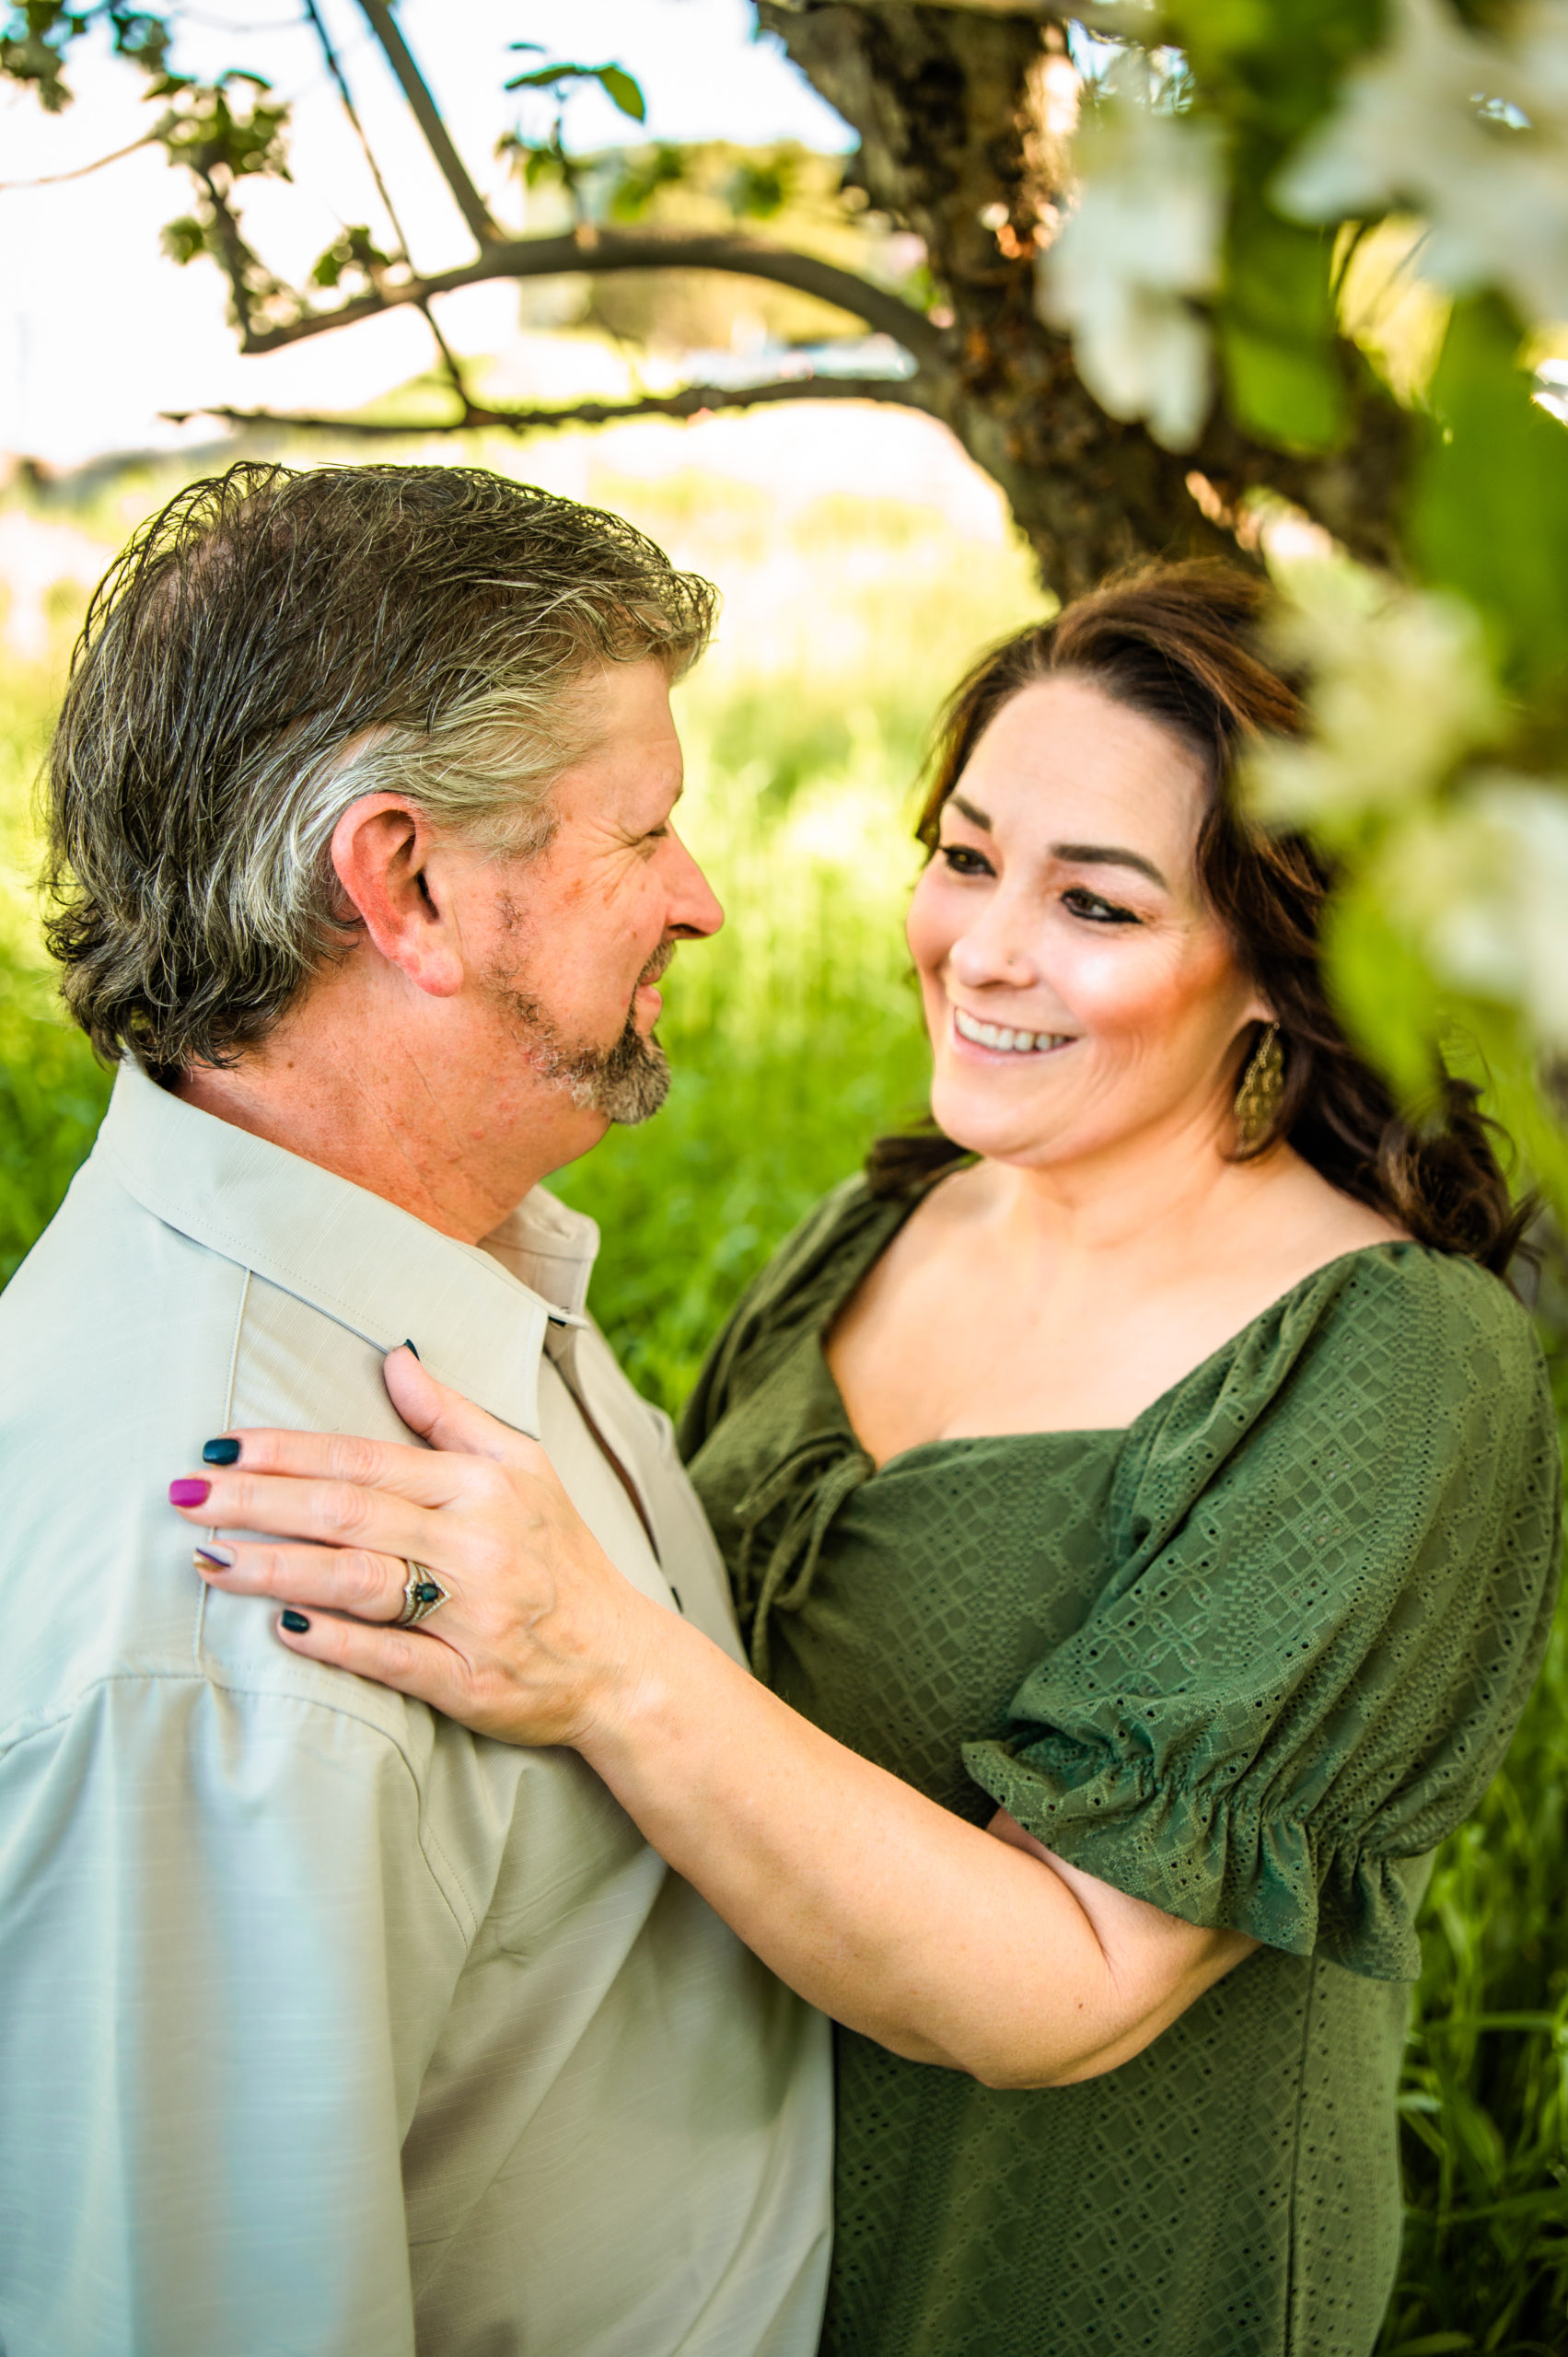 woman placing hand on man's shoulder and smiling during Western Sunset Engagements